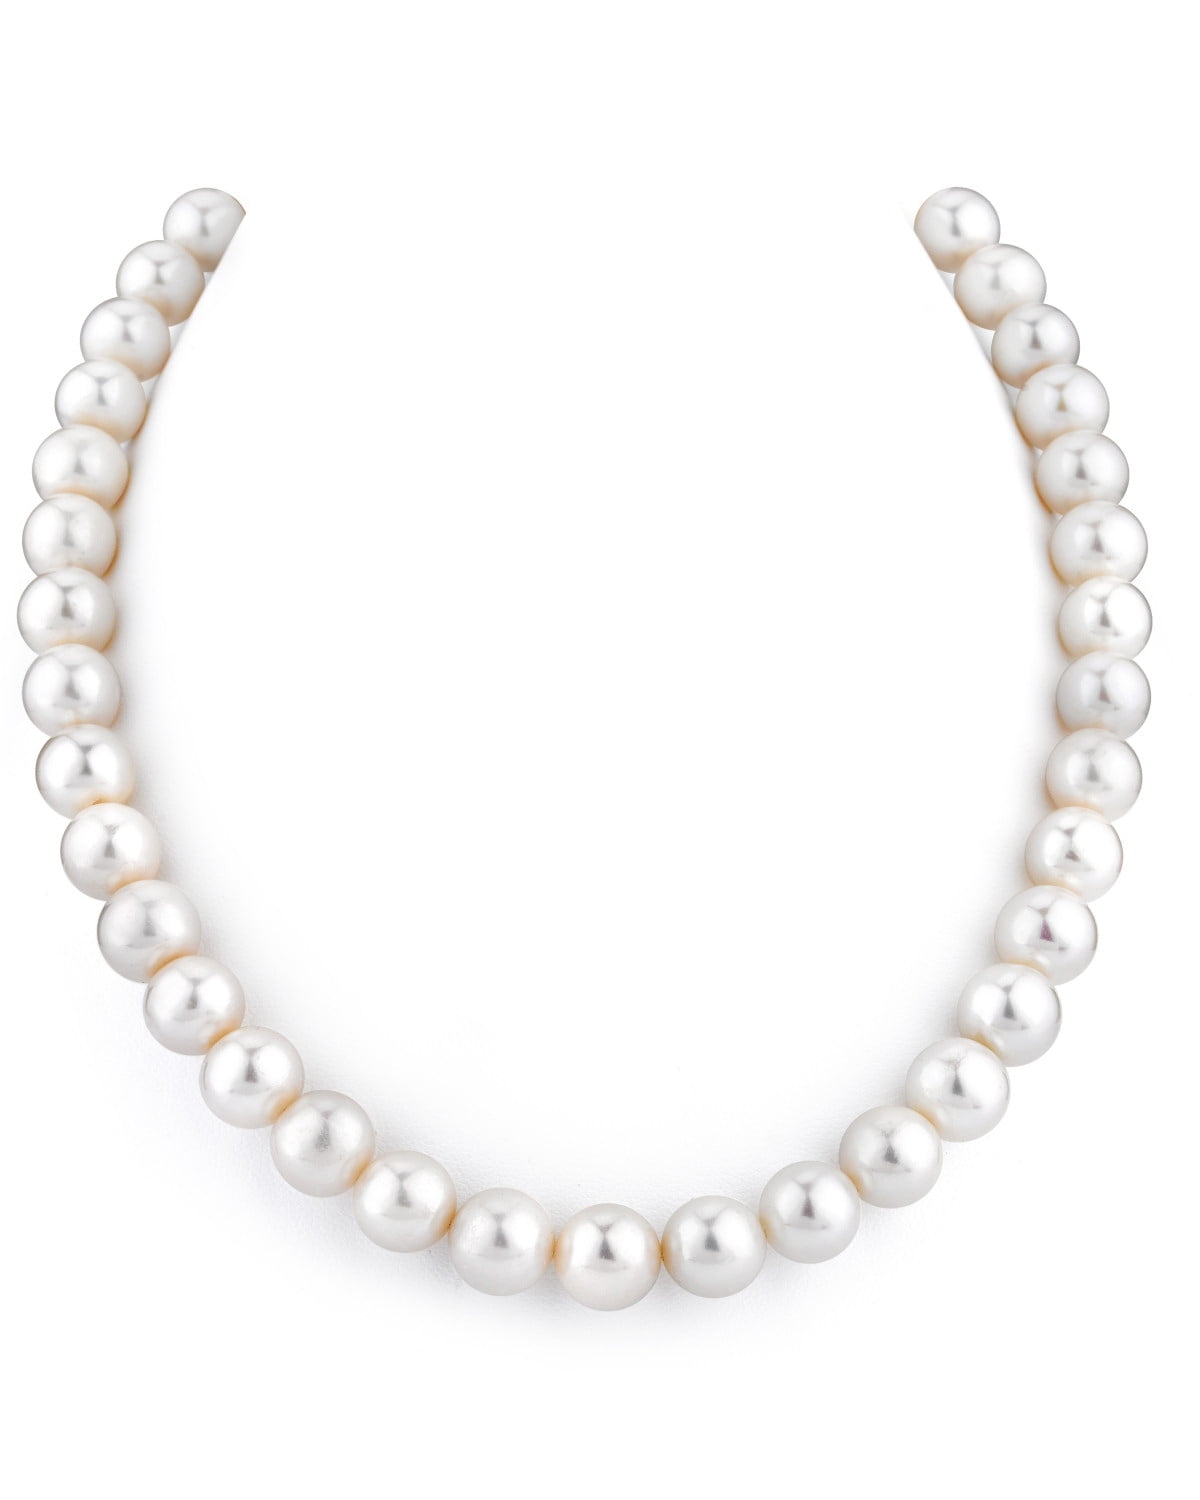 Tin Cup Freshwater White Illusion Pearl Necklace Bracelet SET 18" Inch Cultured